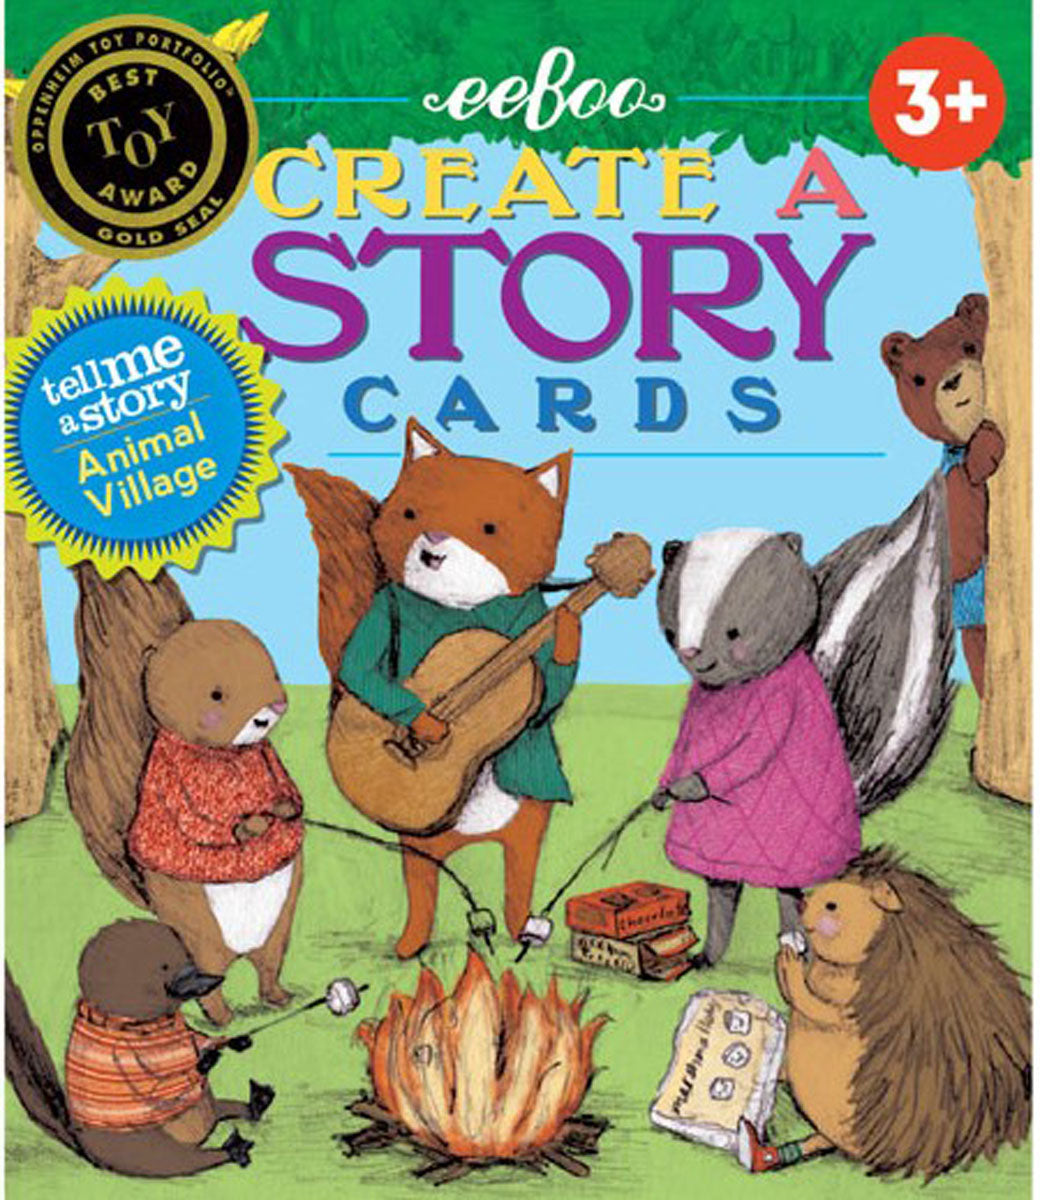 Animal Village - Create a Story Cards